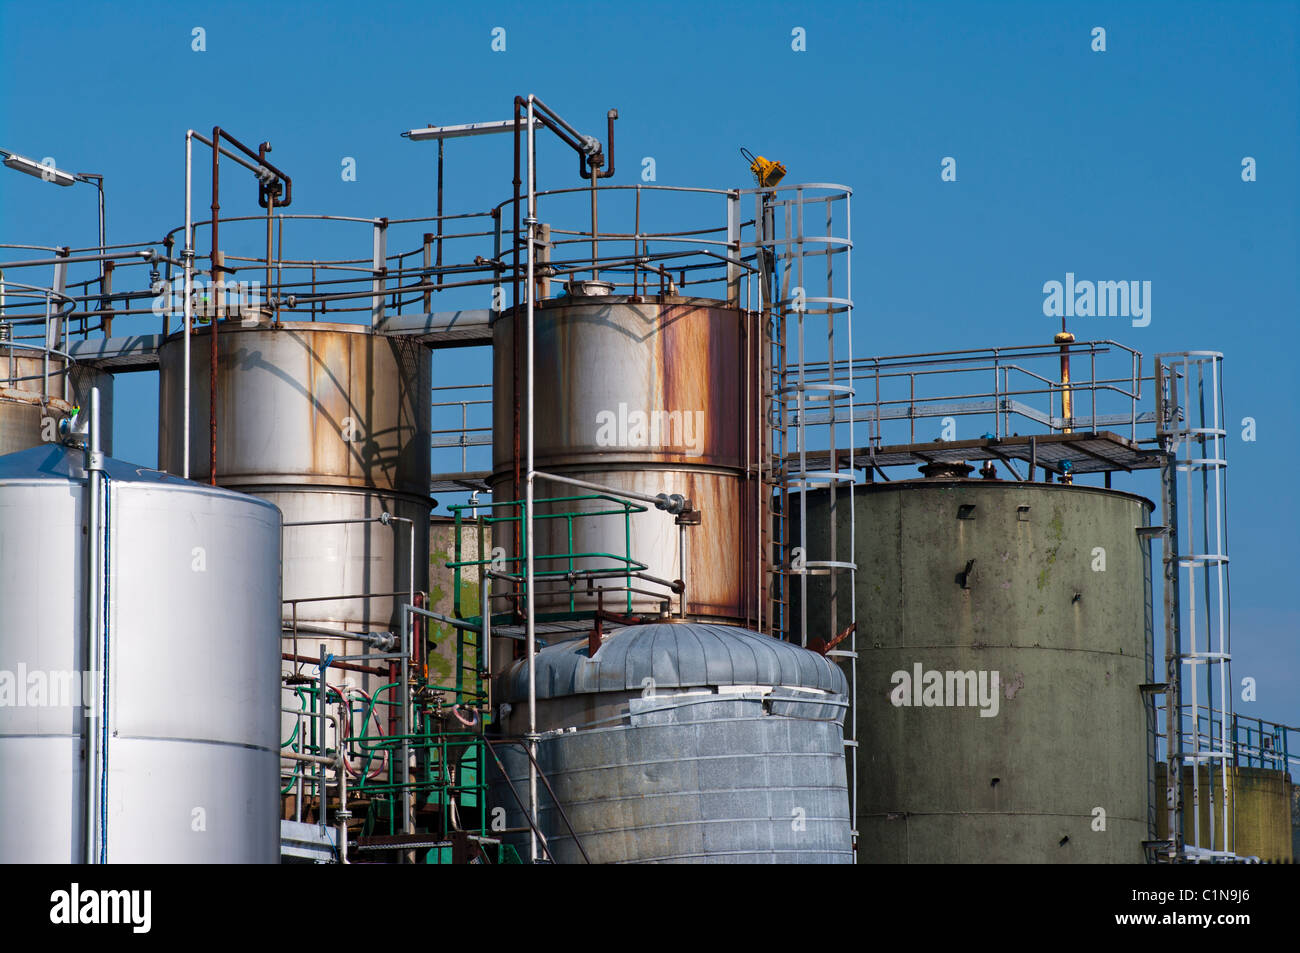 SRM Ltd Lime Kiln Works A Solvent Waste And Recycling Plant Rye East Sussex England Stock Photo